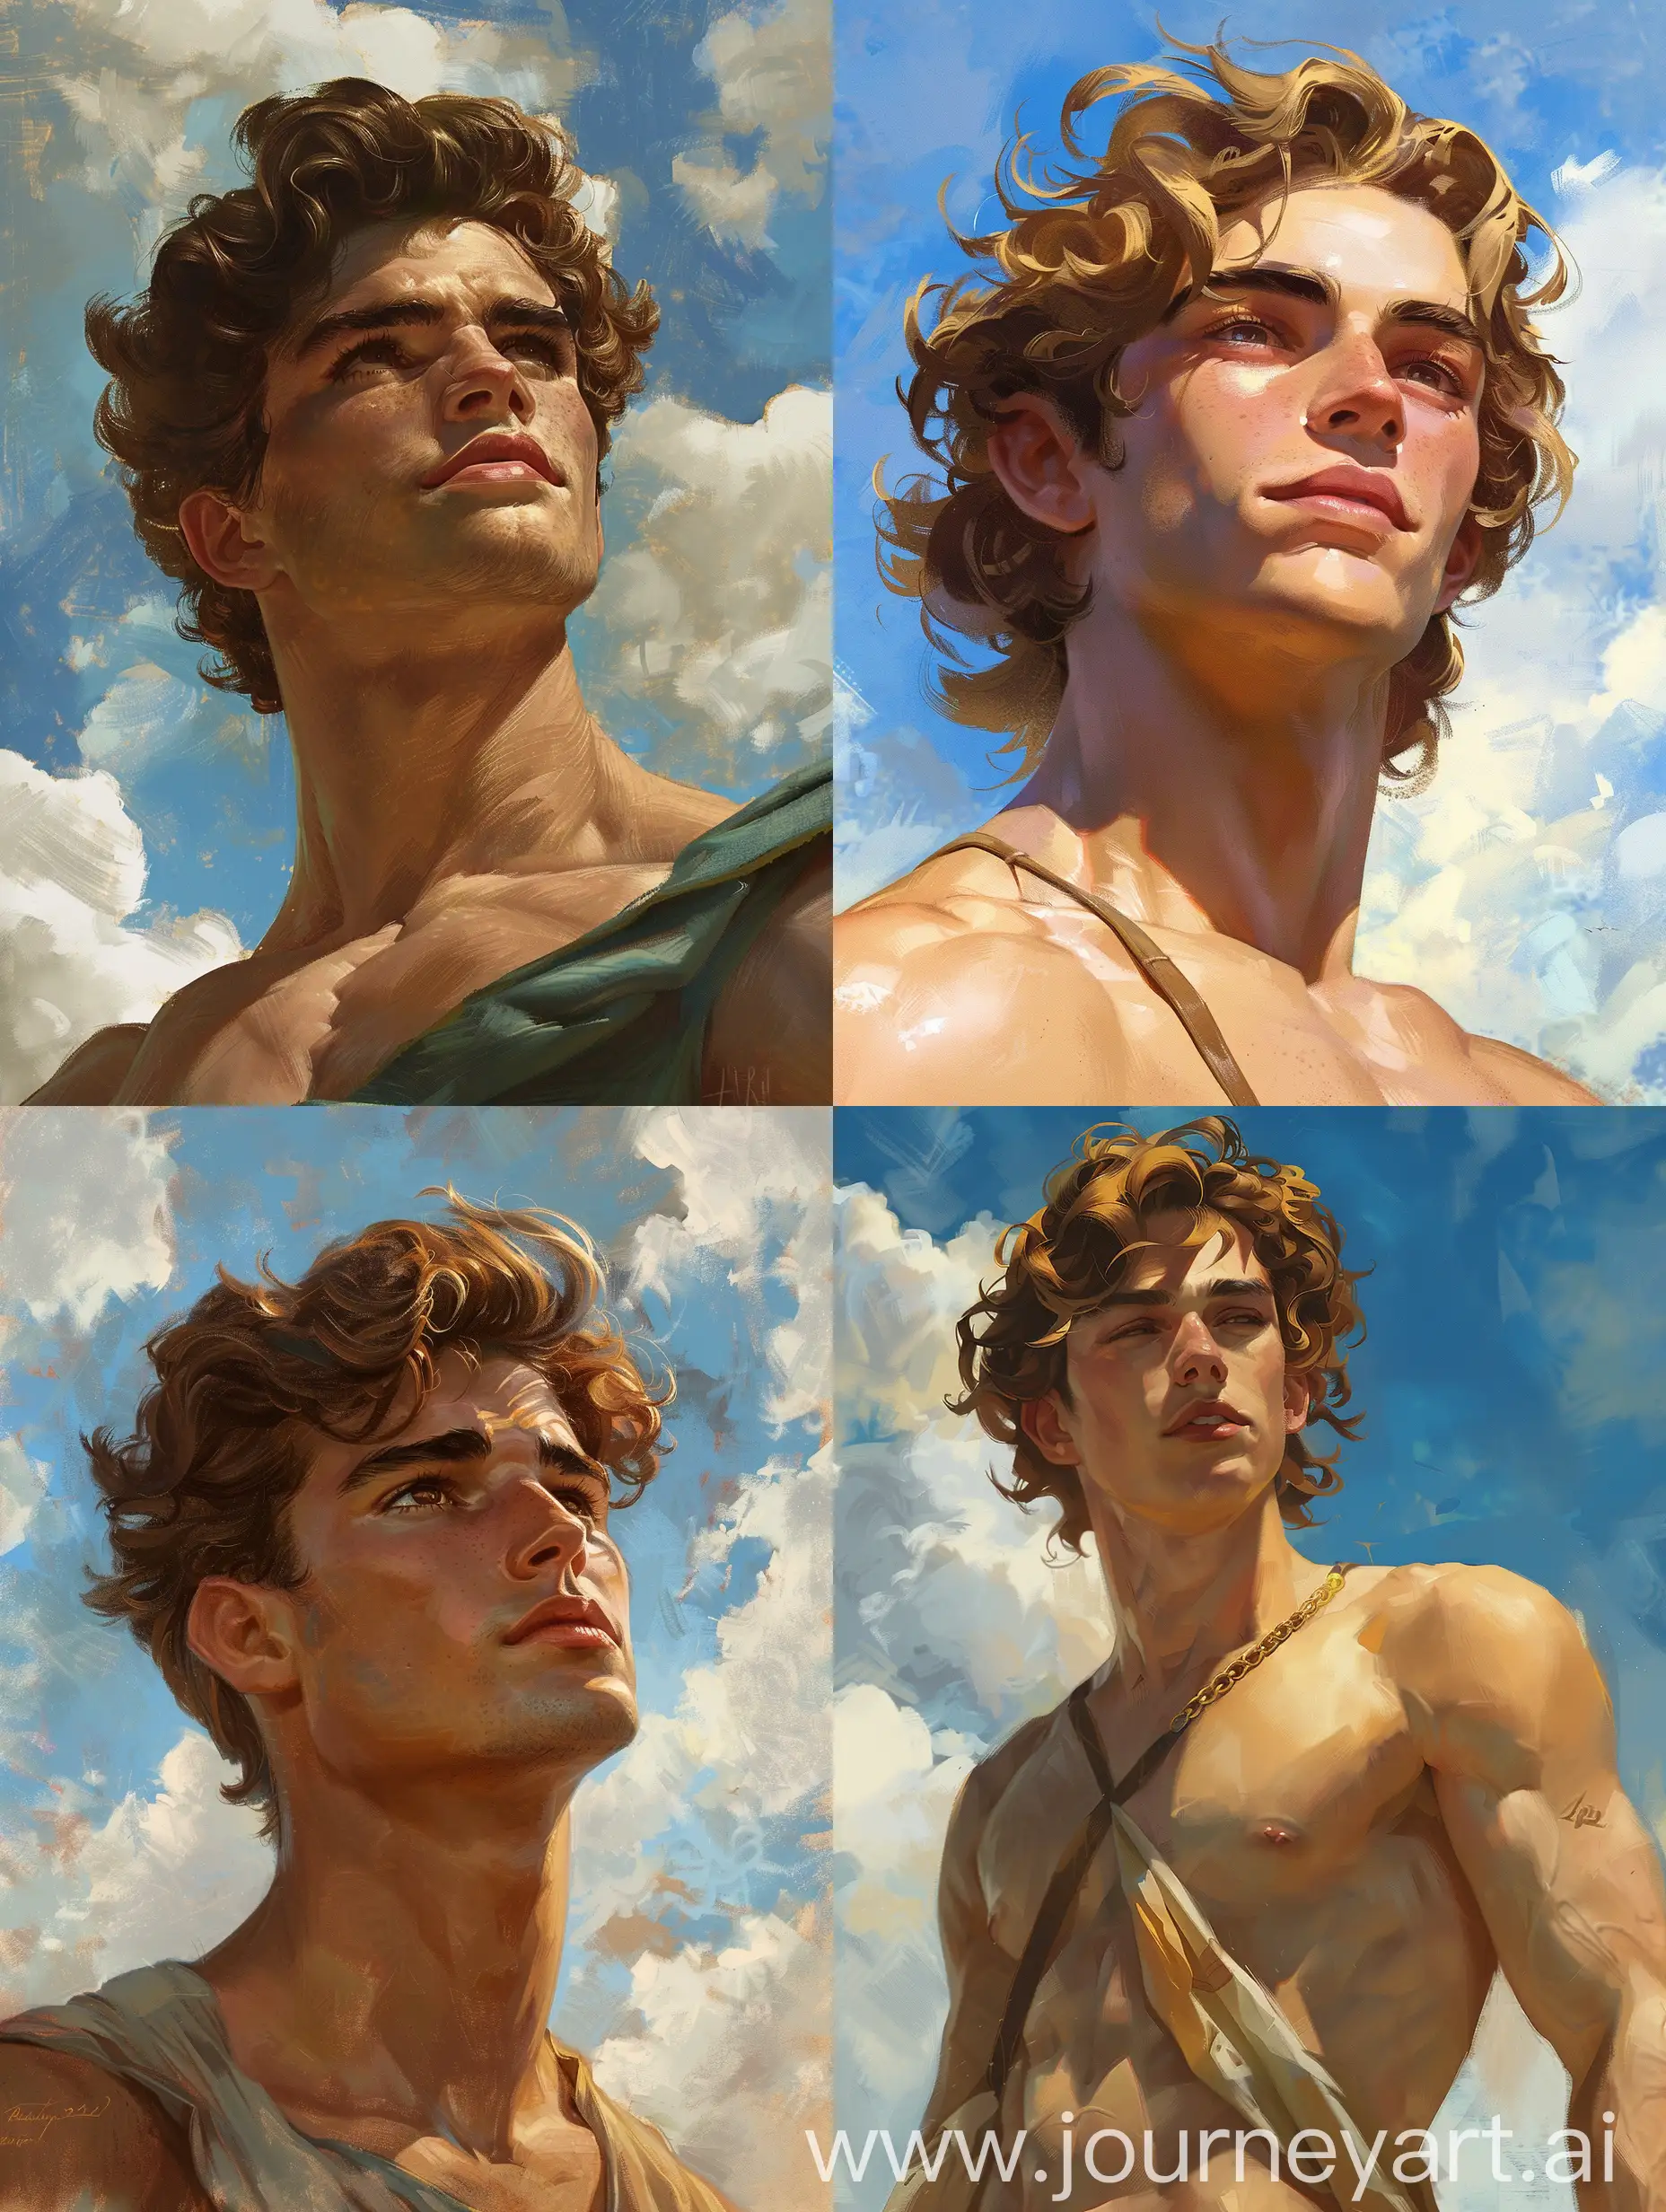 Young-Demigod-with-Bronze-Golden-Brown-Skin-and-Muscular-Build-Under-Open-Sky